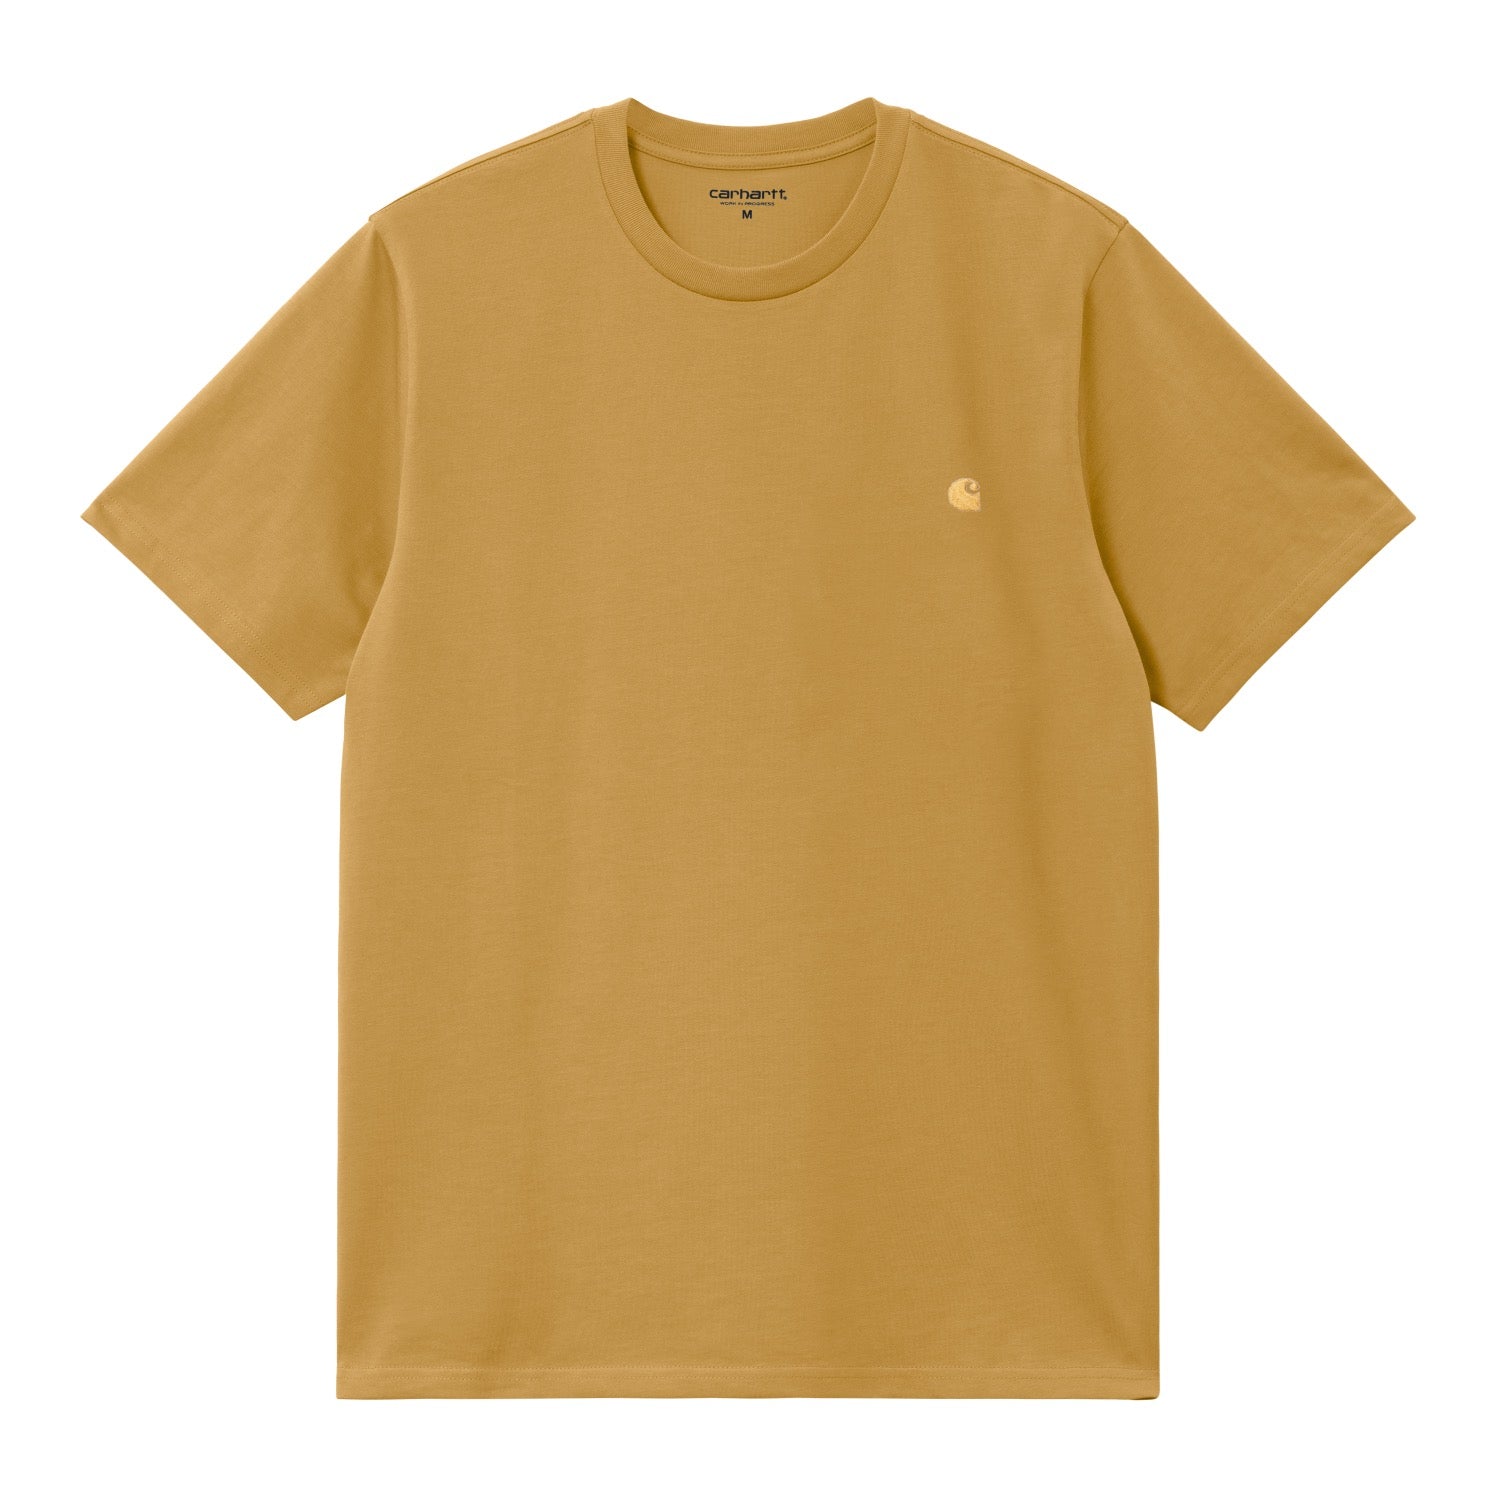 S/S CHASE T-SHIRT - Sunray / Gold